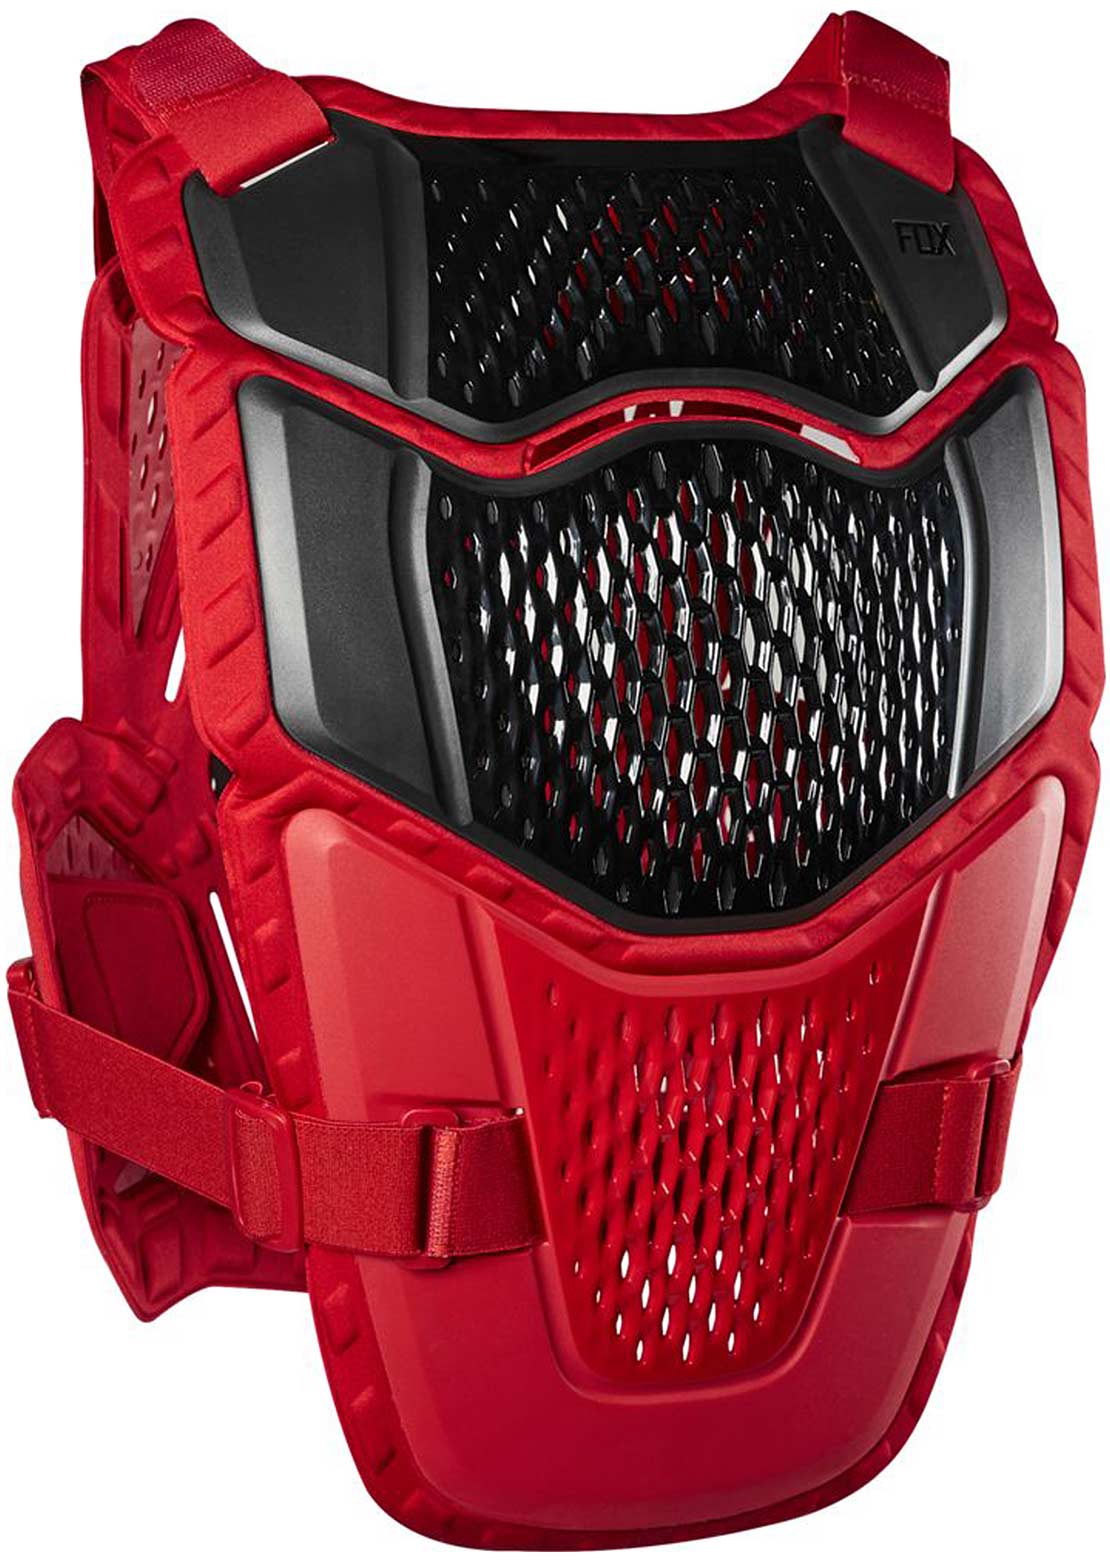 Fox Junior Raceframe Roost Chest Guard Flame Red